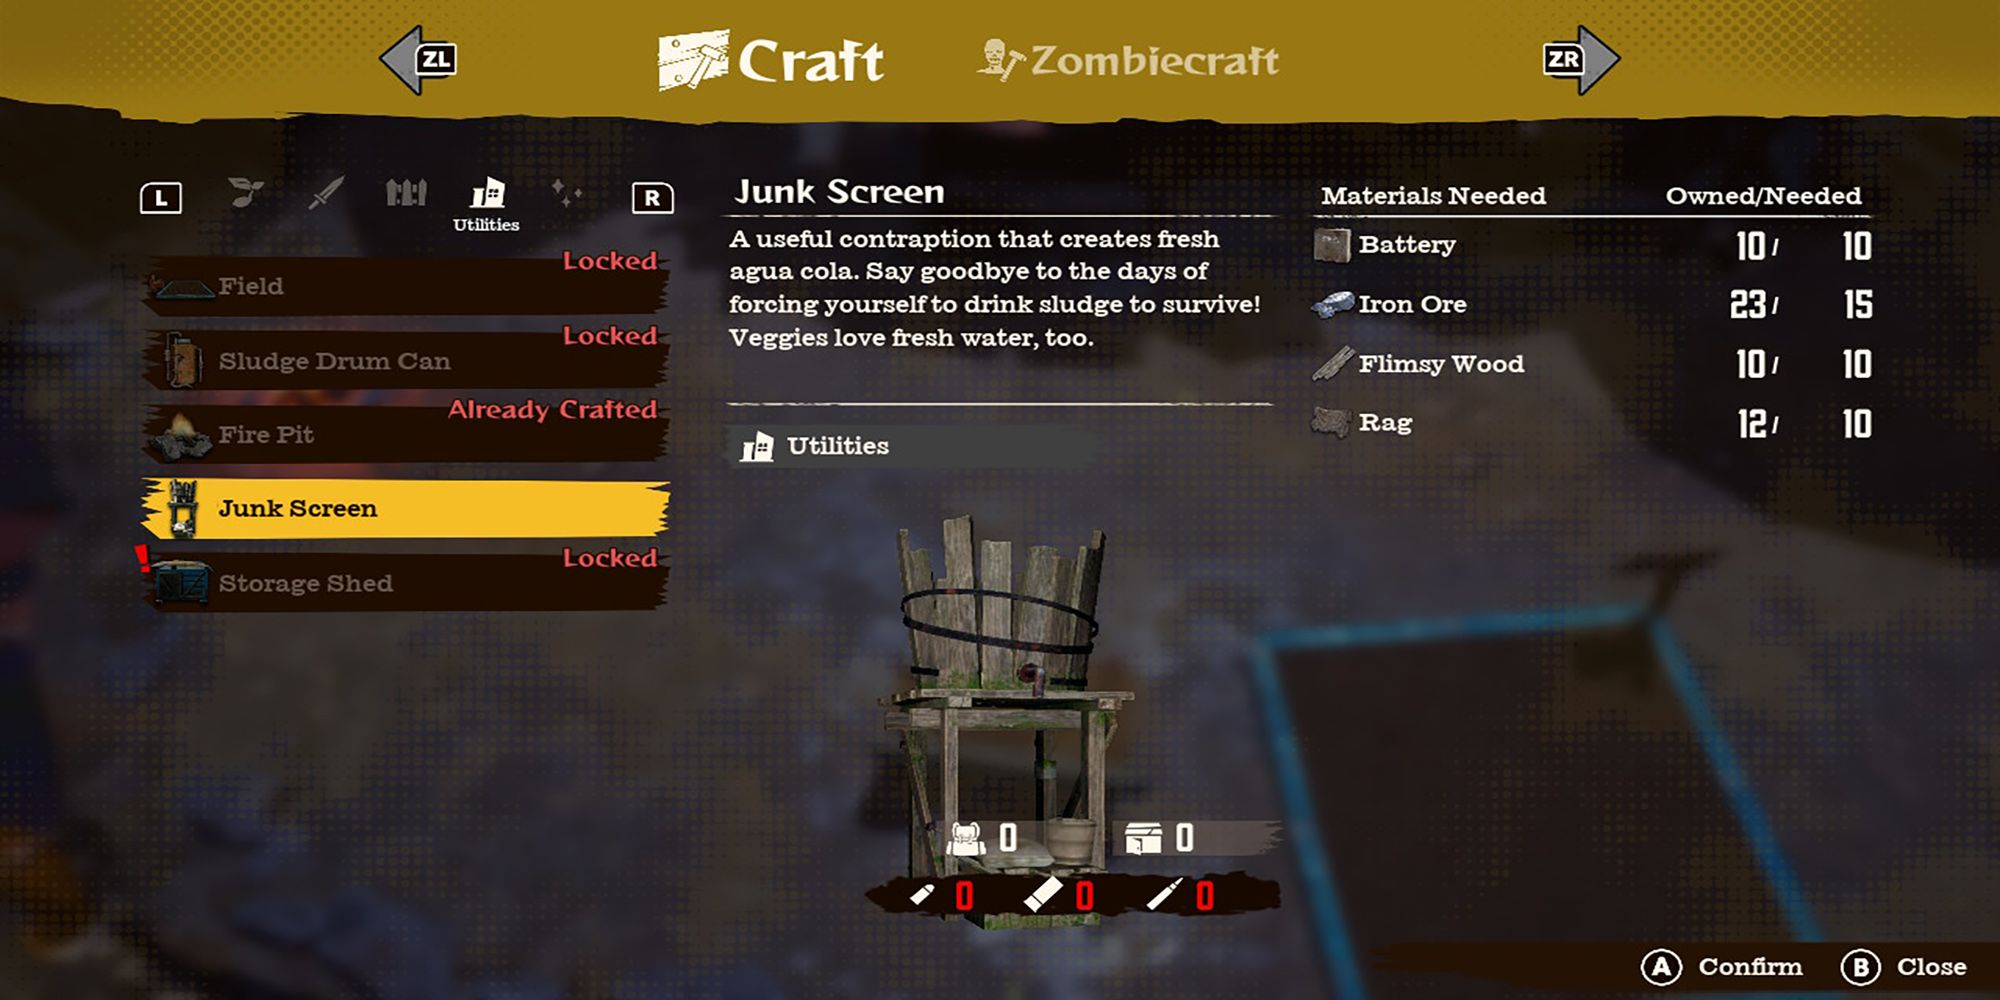 A description and recipe for the Junk Screen is displayed in Deadcraft's detailed and massive crafting table menu.